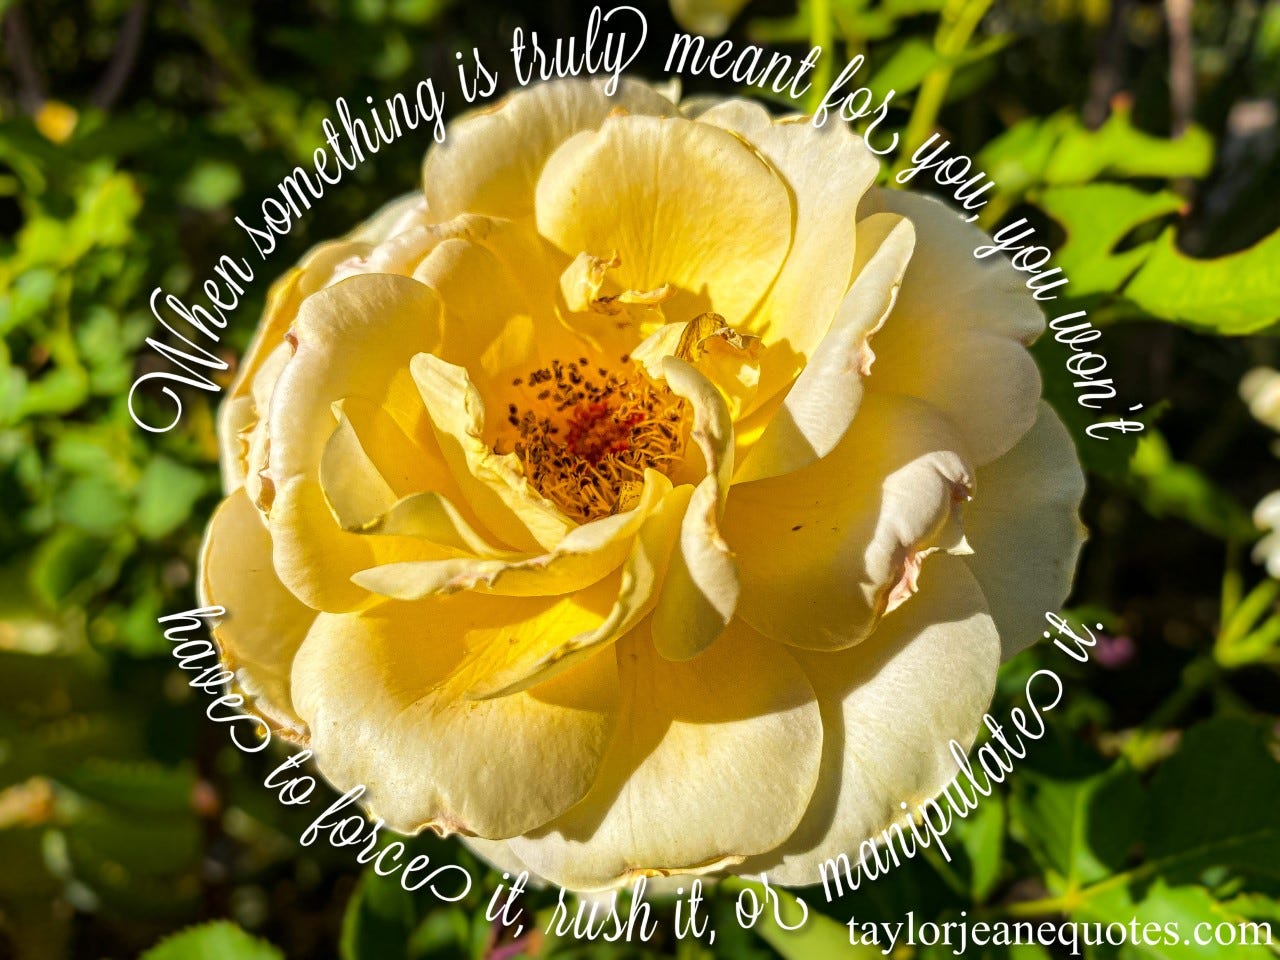 taylor jeane quotes, taylor jeane, taylor wilson, meaningful quotes, purpose quotes, motivational quotes, inspirational quotes, quote of the day, uplifting quote of the day, purpose quotes, yellow rose, trust quotes, life quotes, trust in life quotes, path quotes, phoenix botanical gardens